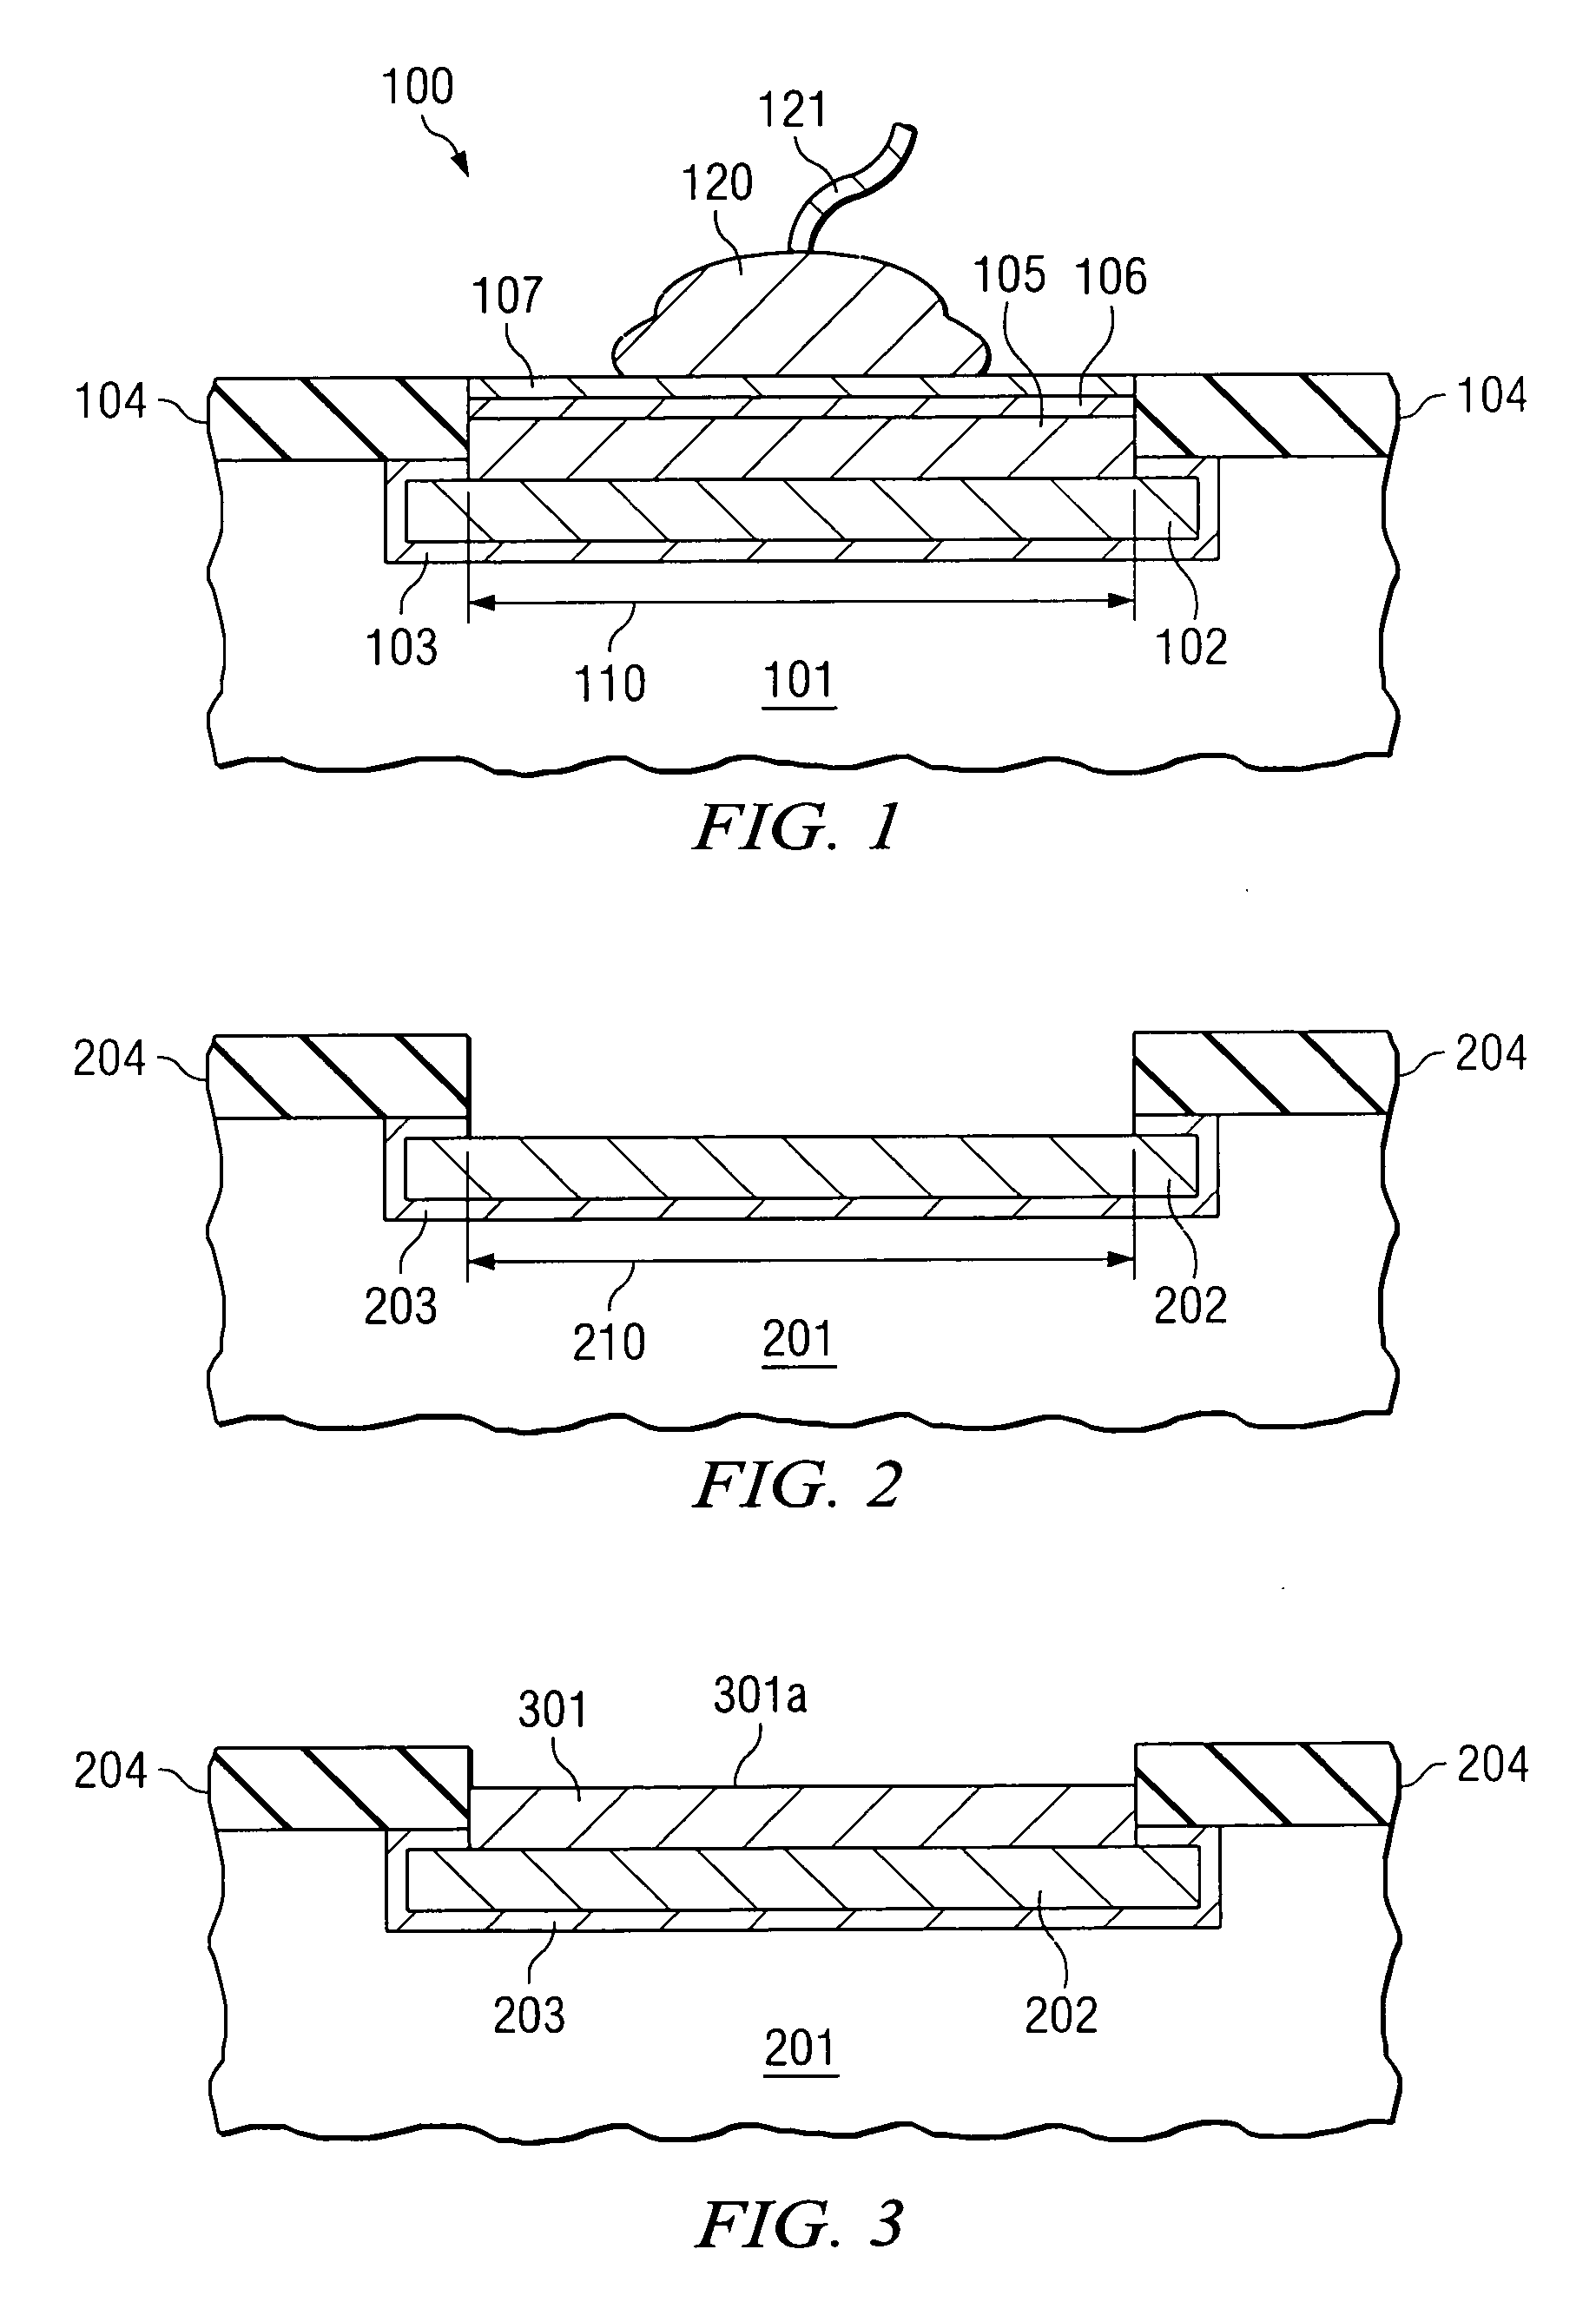 Copper-metallized integrated circuits having electroless thick copper bond pads